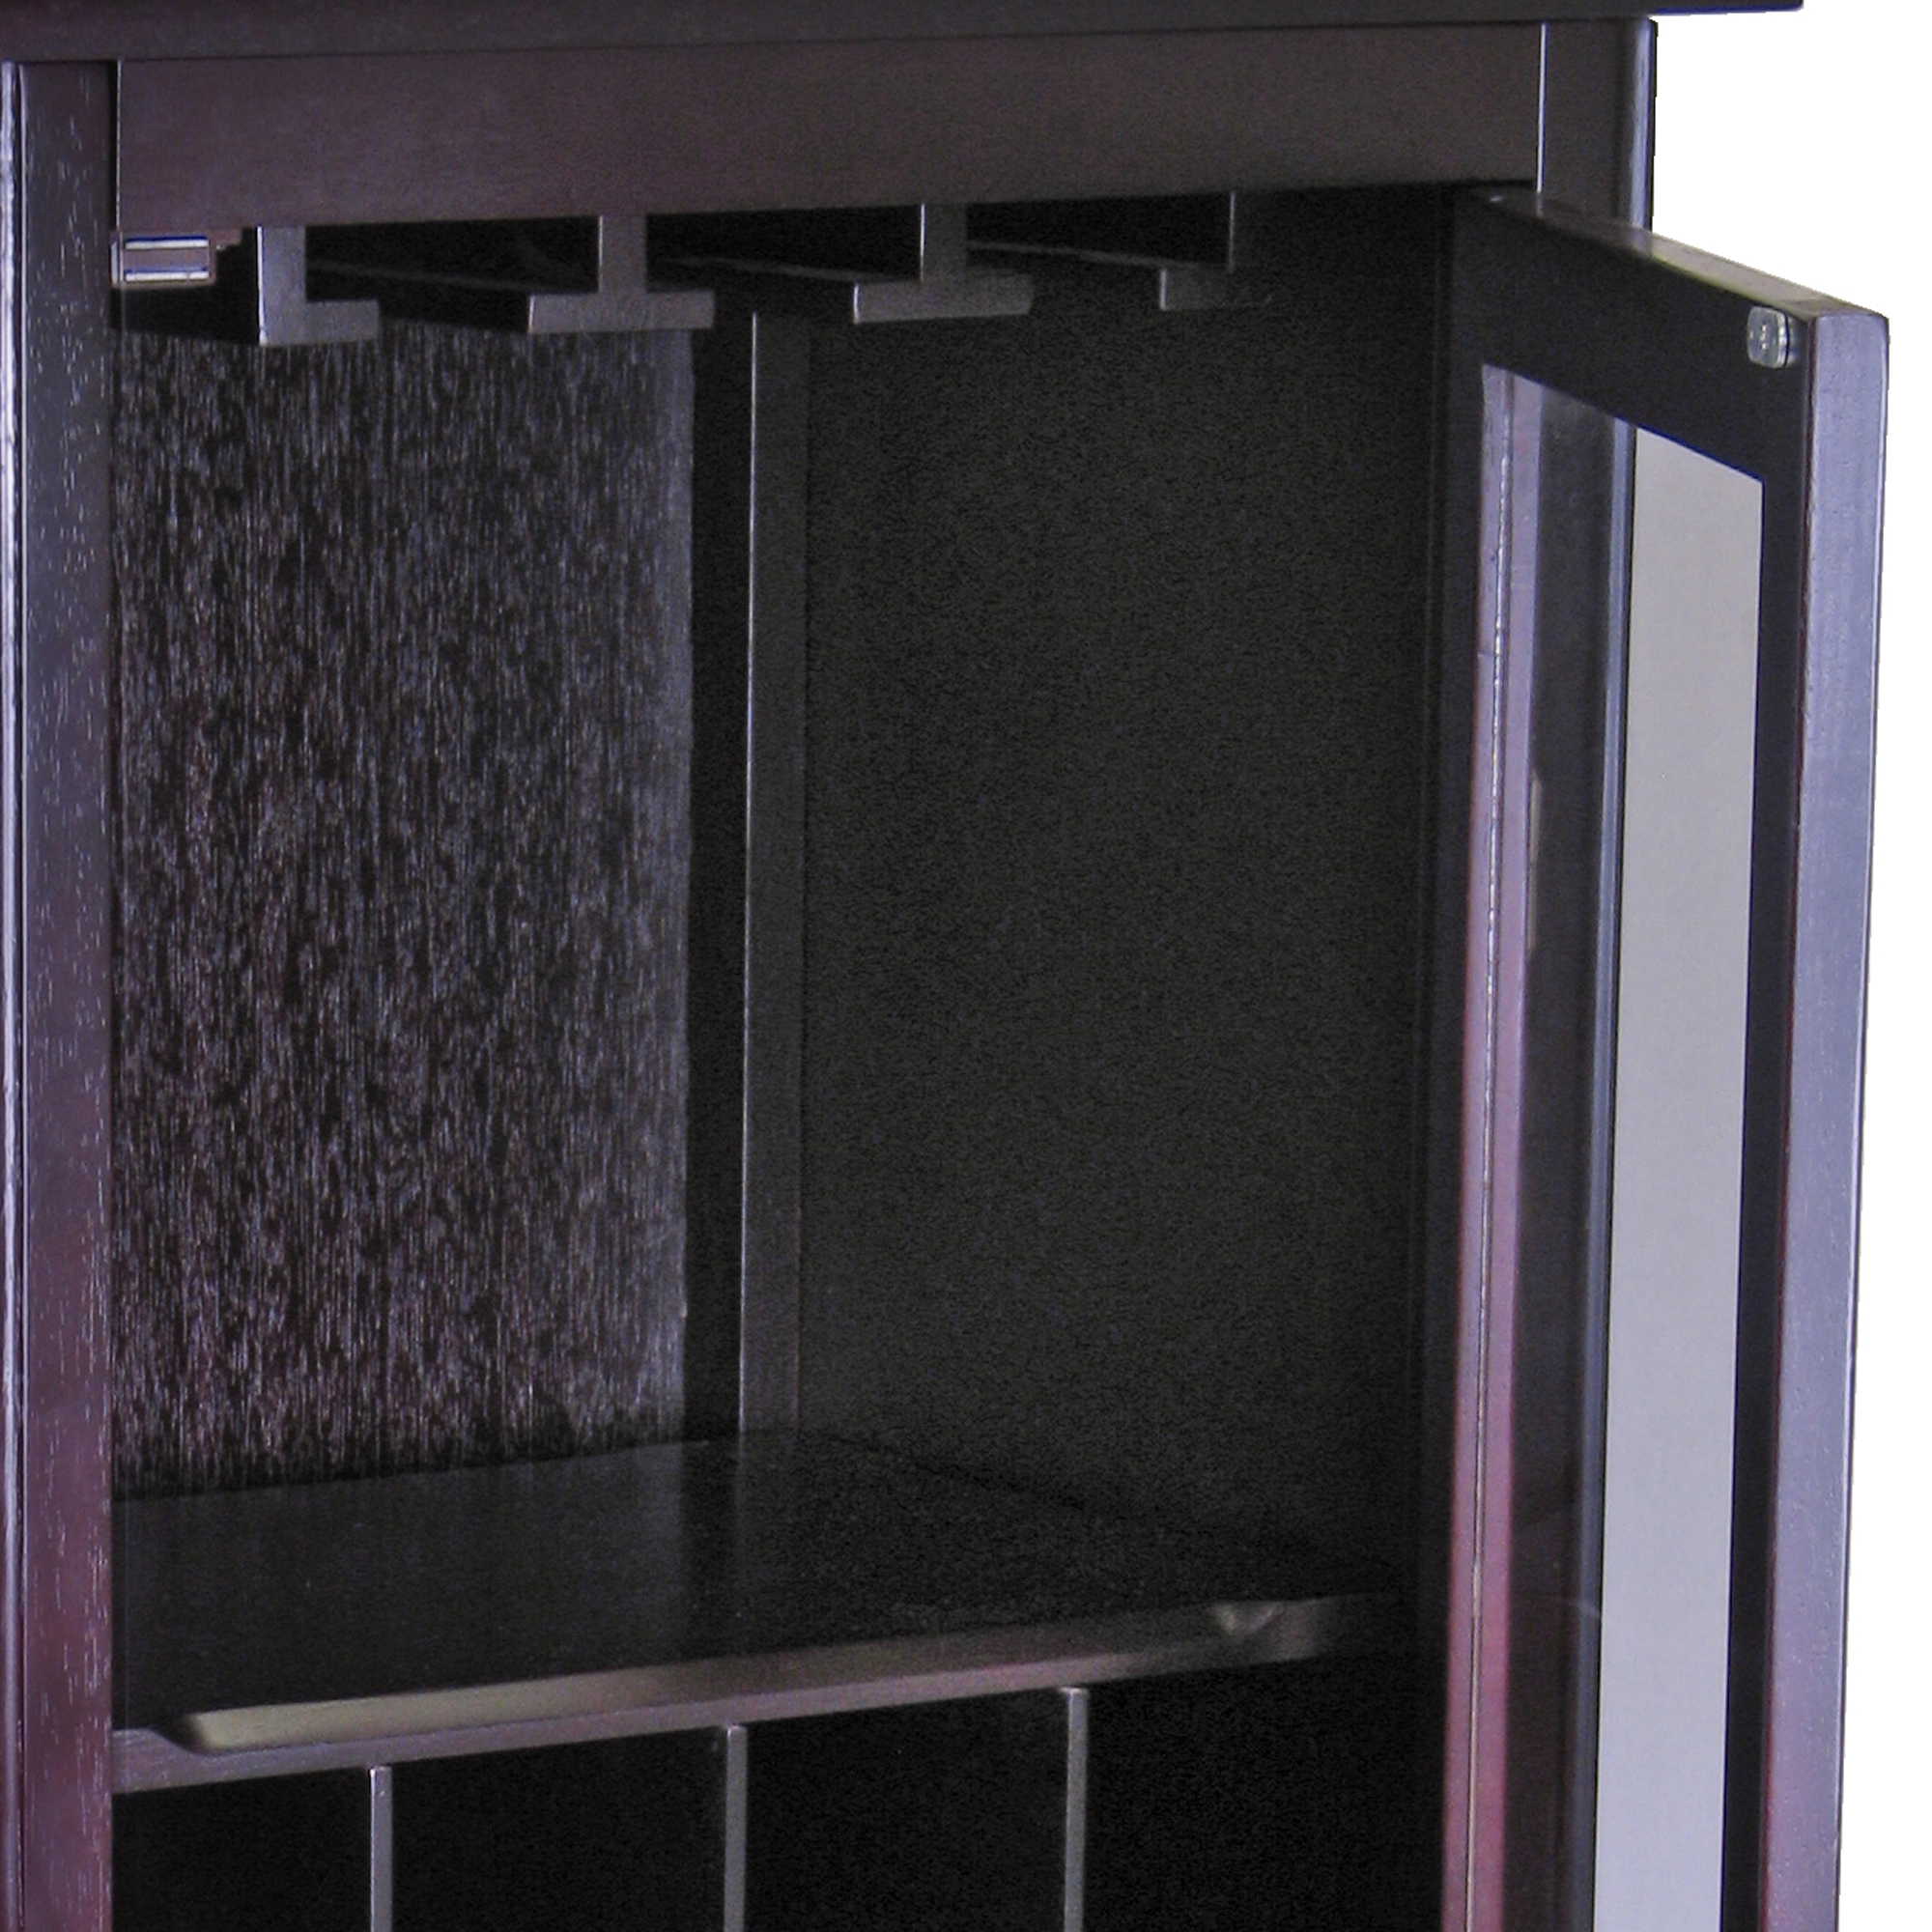 Winsome Wood Ryan 16-Bottle Wine Cabinet with Display Glass Door, Espresso Finish - image 3 of 5